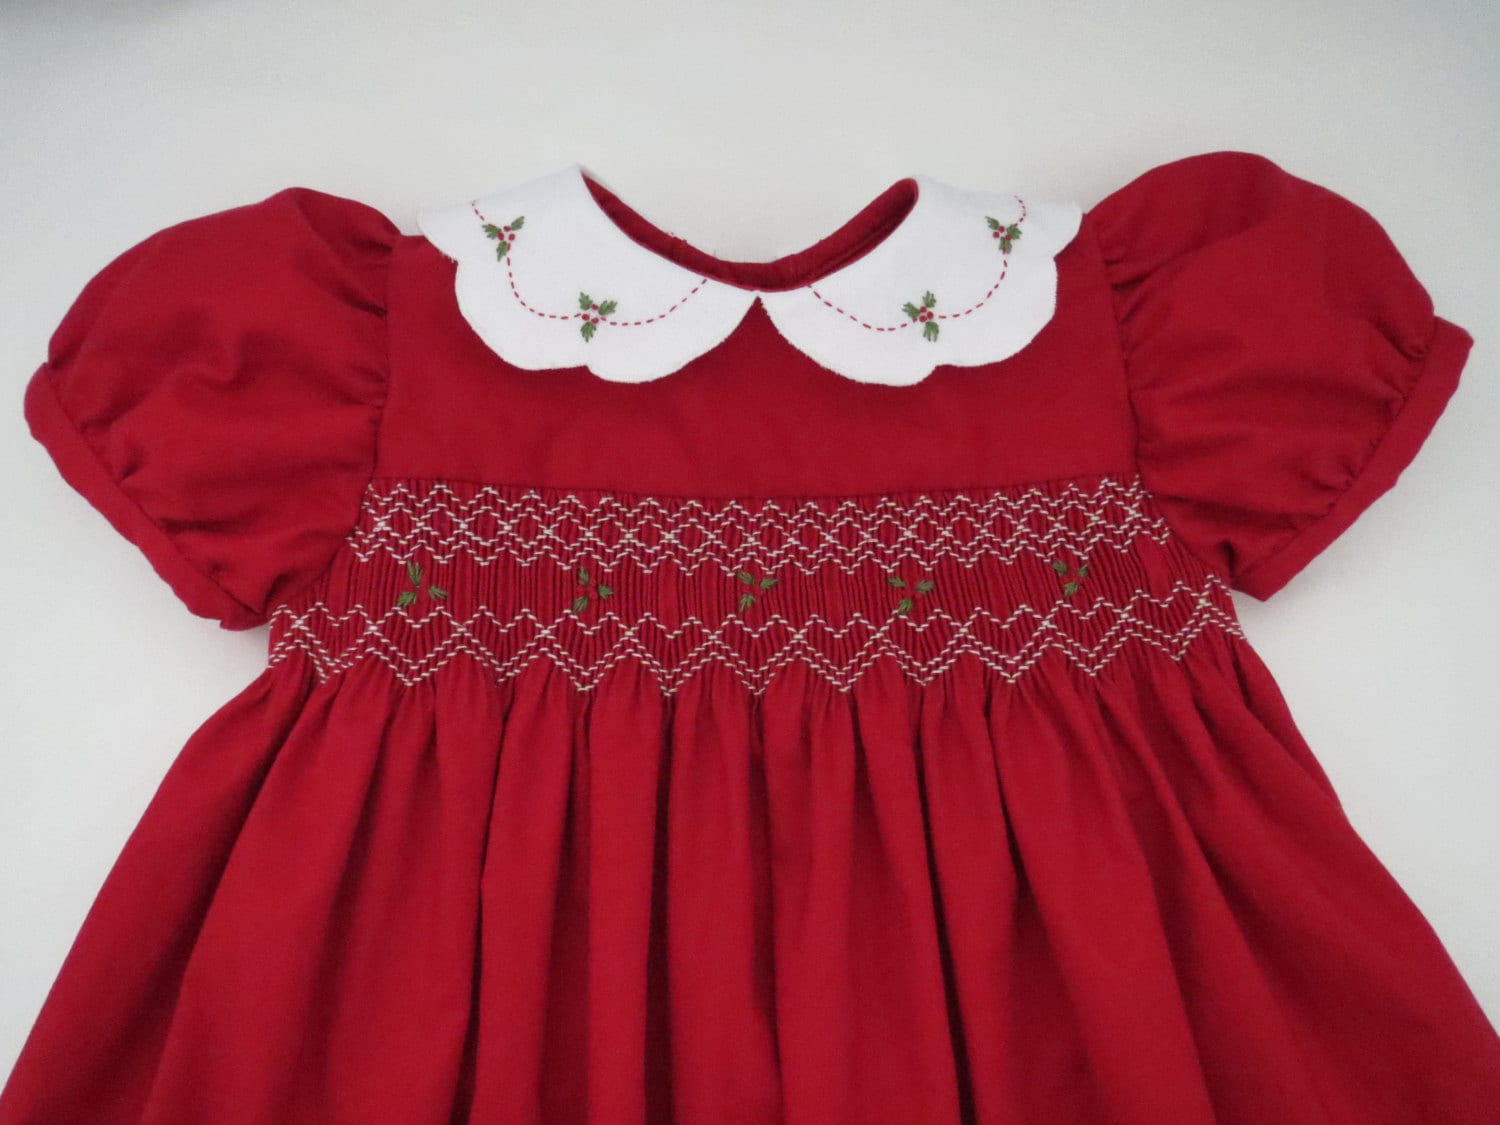 Adorable Red and White Christmas Dress for Baby Girl. Hand - Etsy